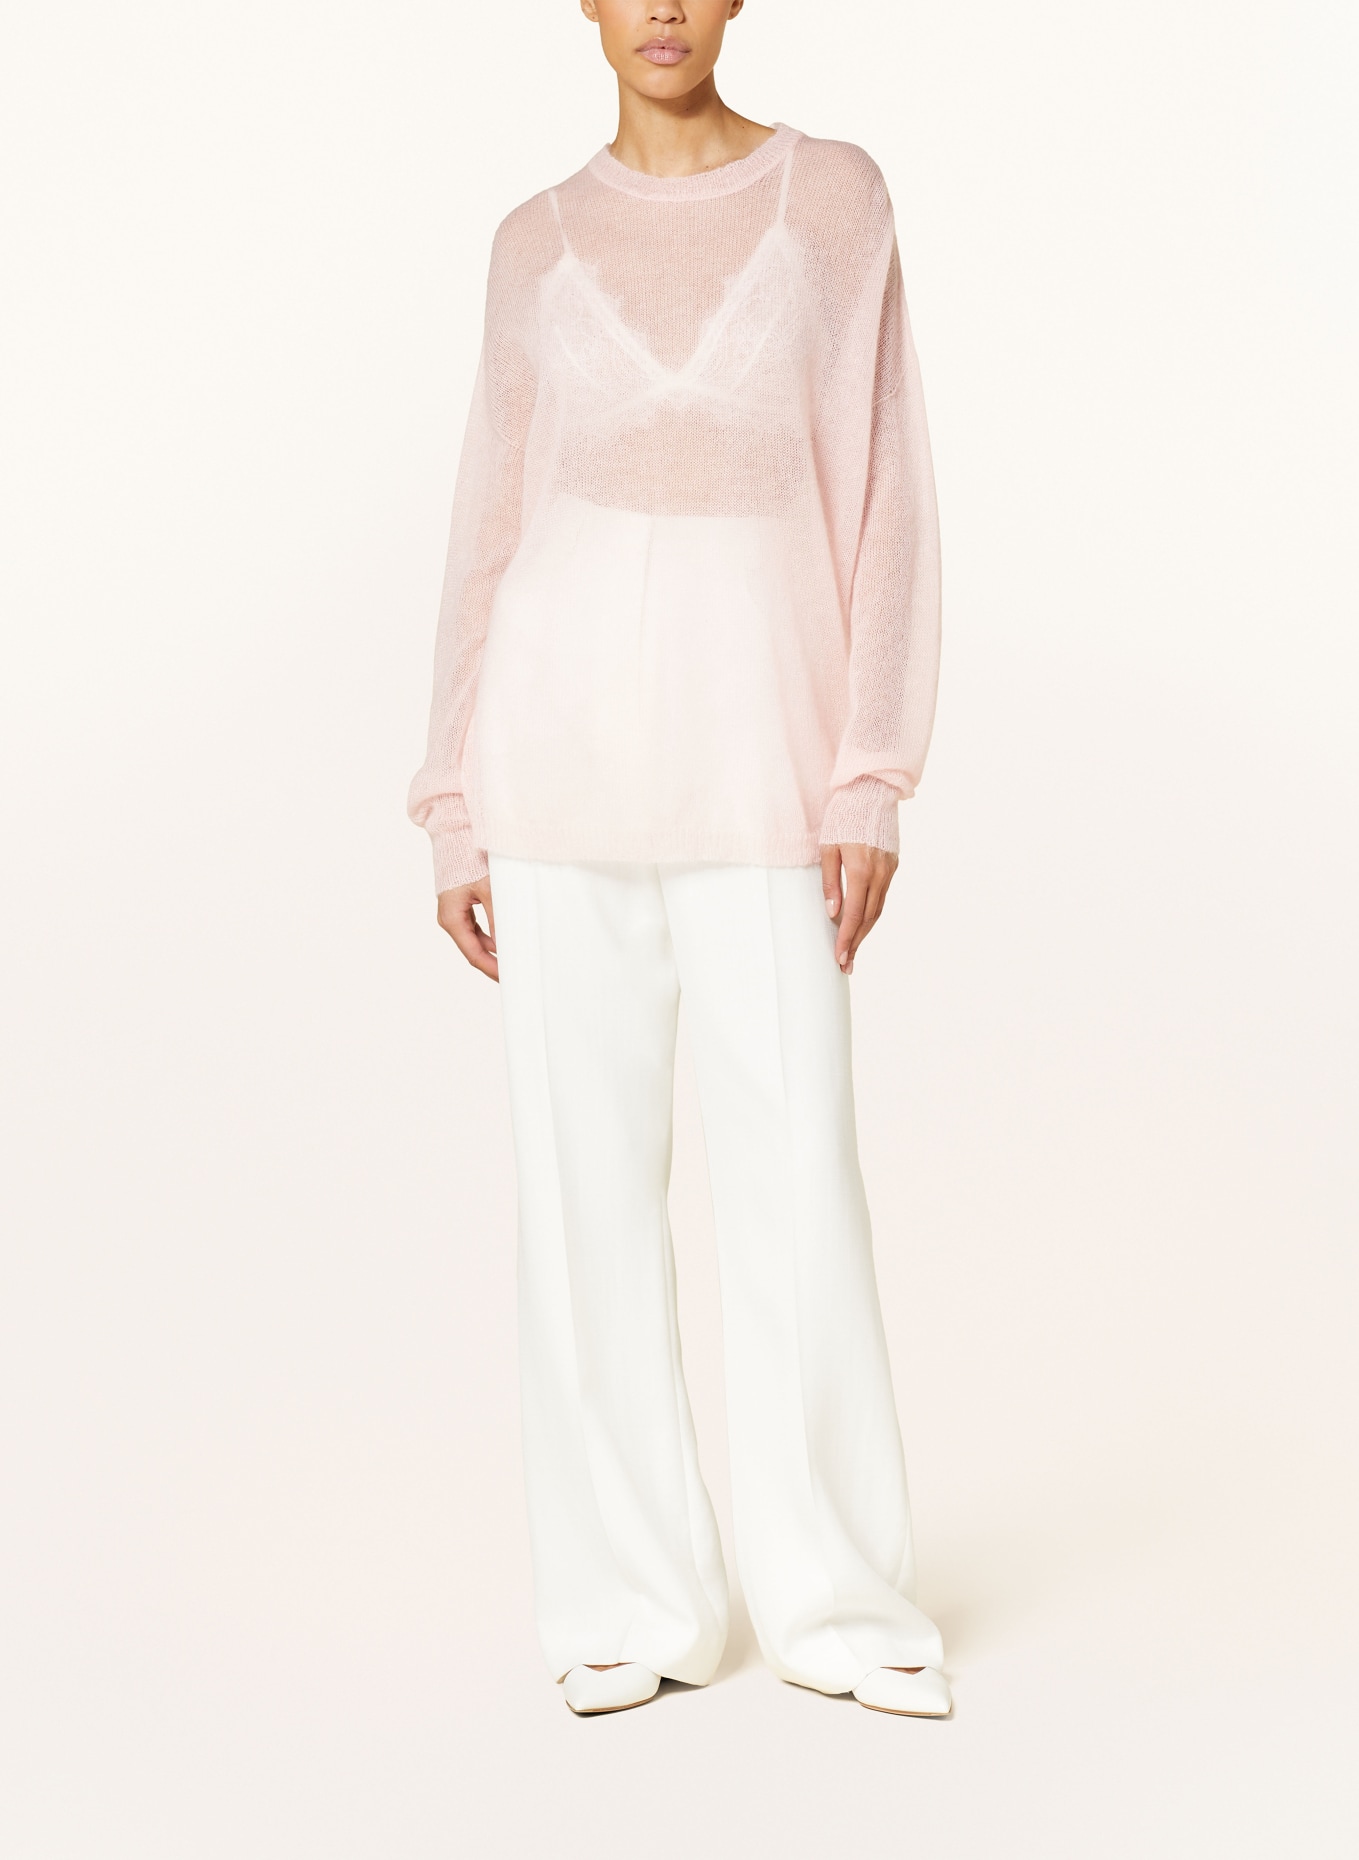 FABIANA FILIPPI Sweater with mohair, Color: LIGHT PINK (Image 2)